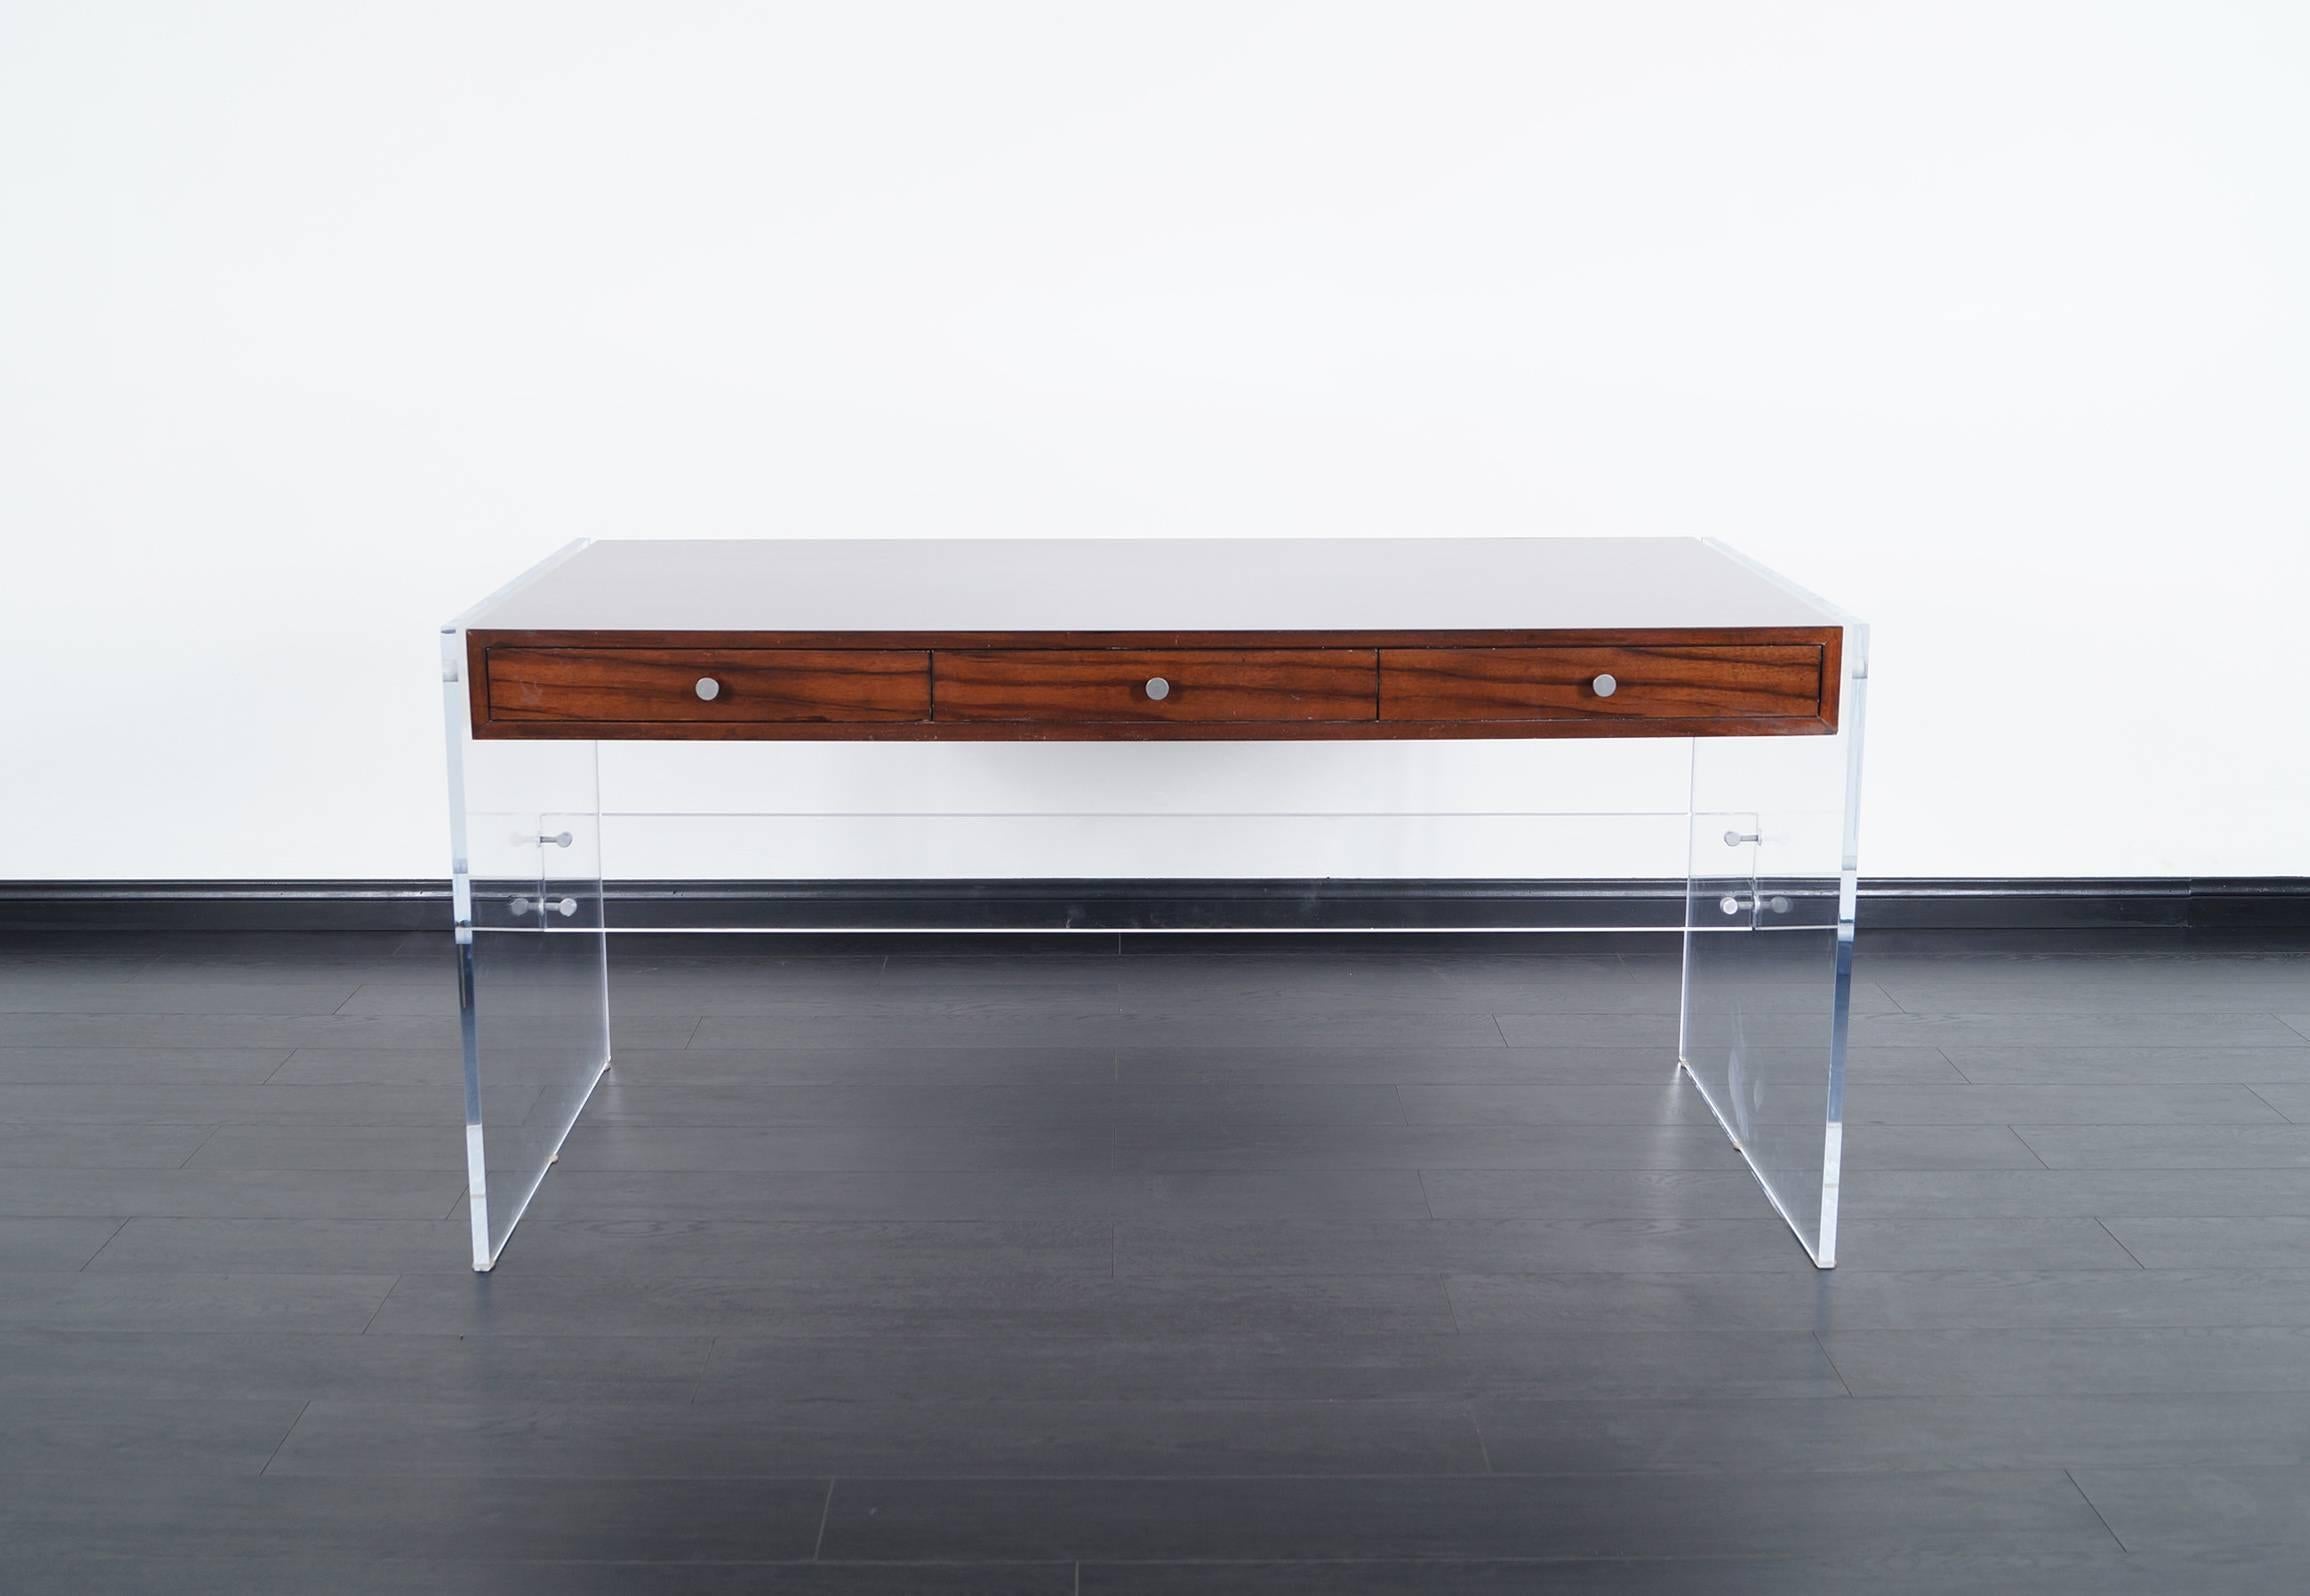 Fabulous modernist desk by Helen Aumont. Made from dark mahogany with Lucite bases which gives the illusion of a floating case.